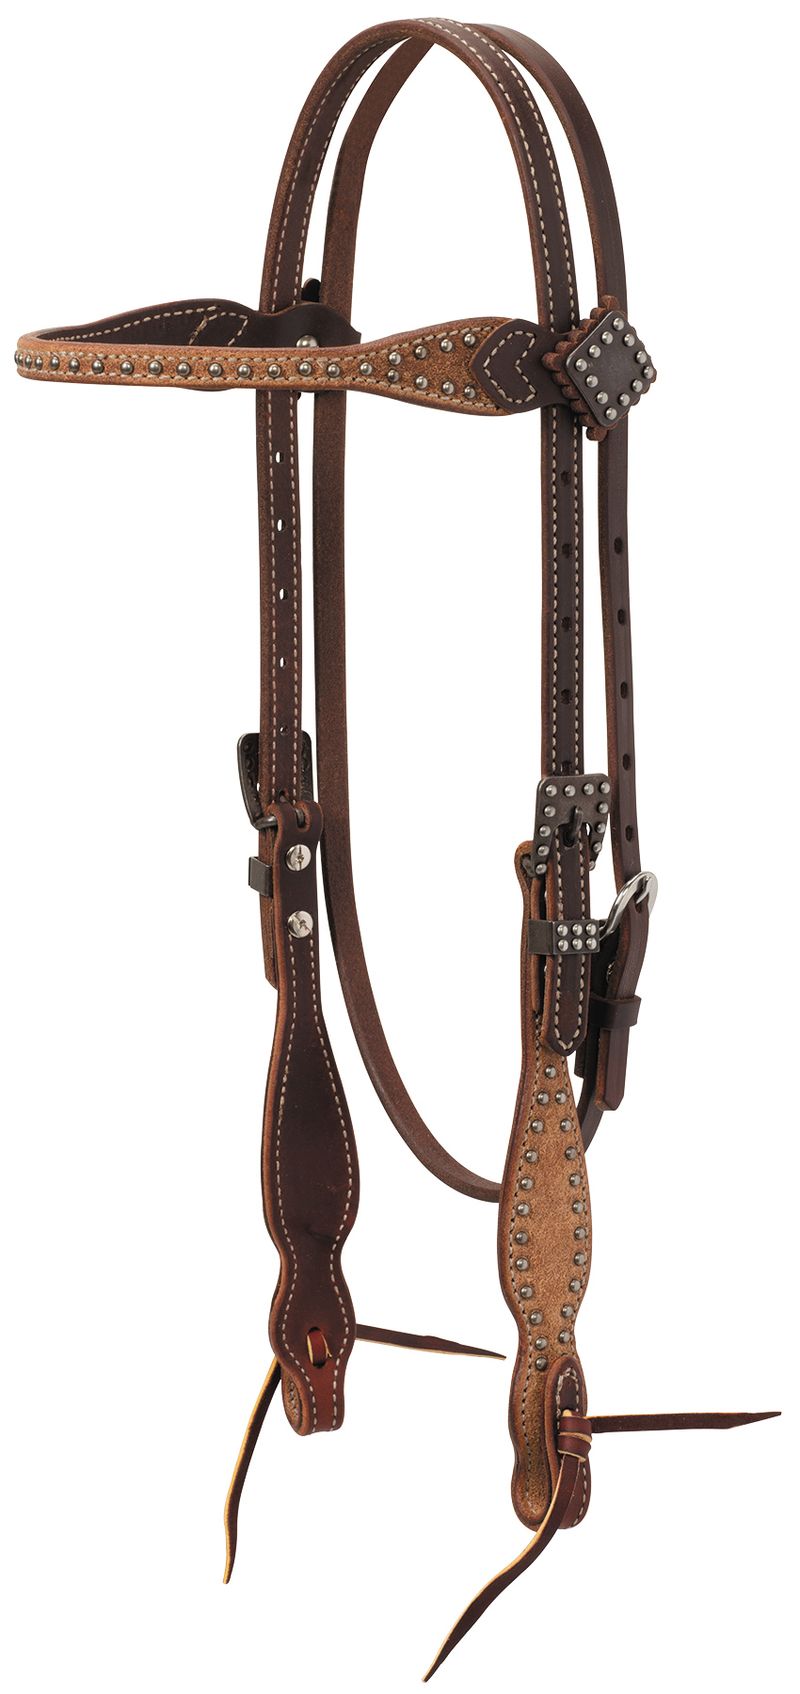 Rough-Out-Oiled-Canyon-Rose-Browband-Headstall